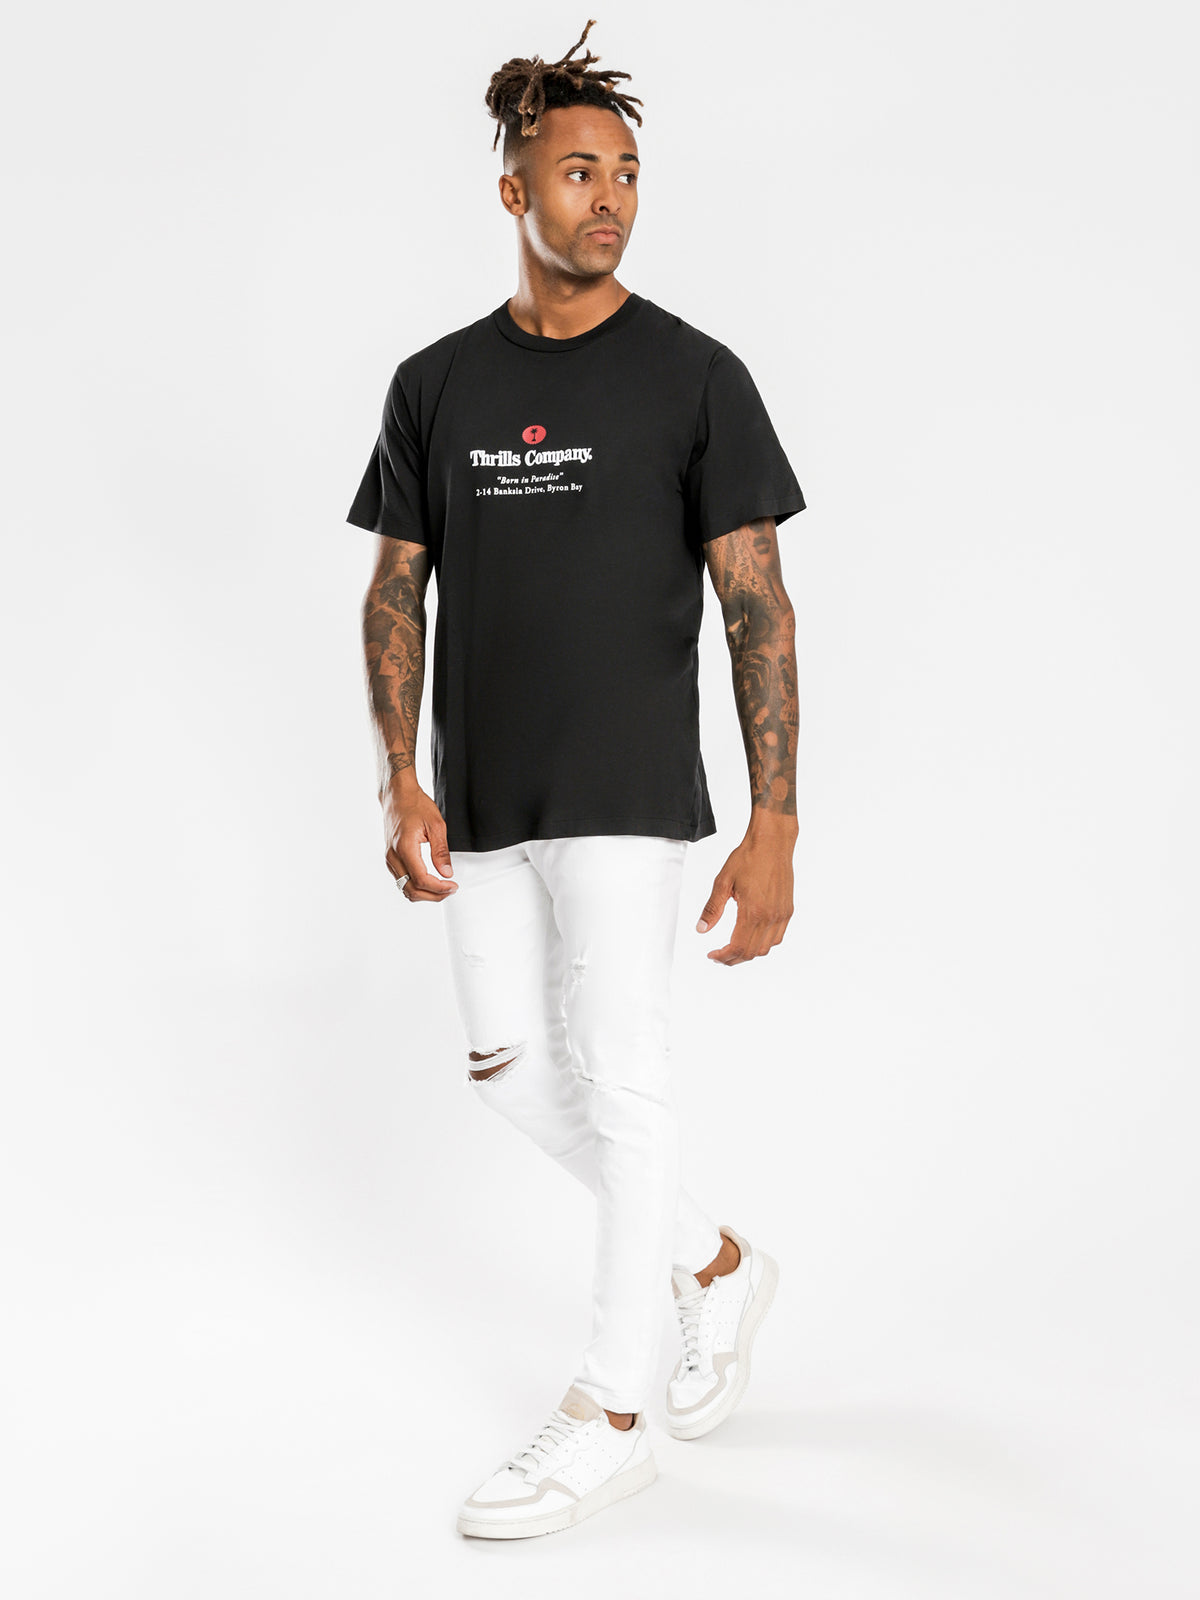 Born in Paradise Merch Fit T-Shirt in Black